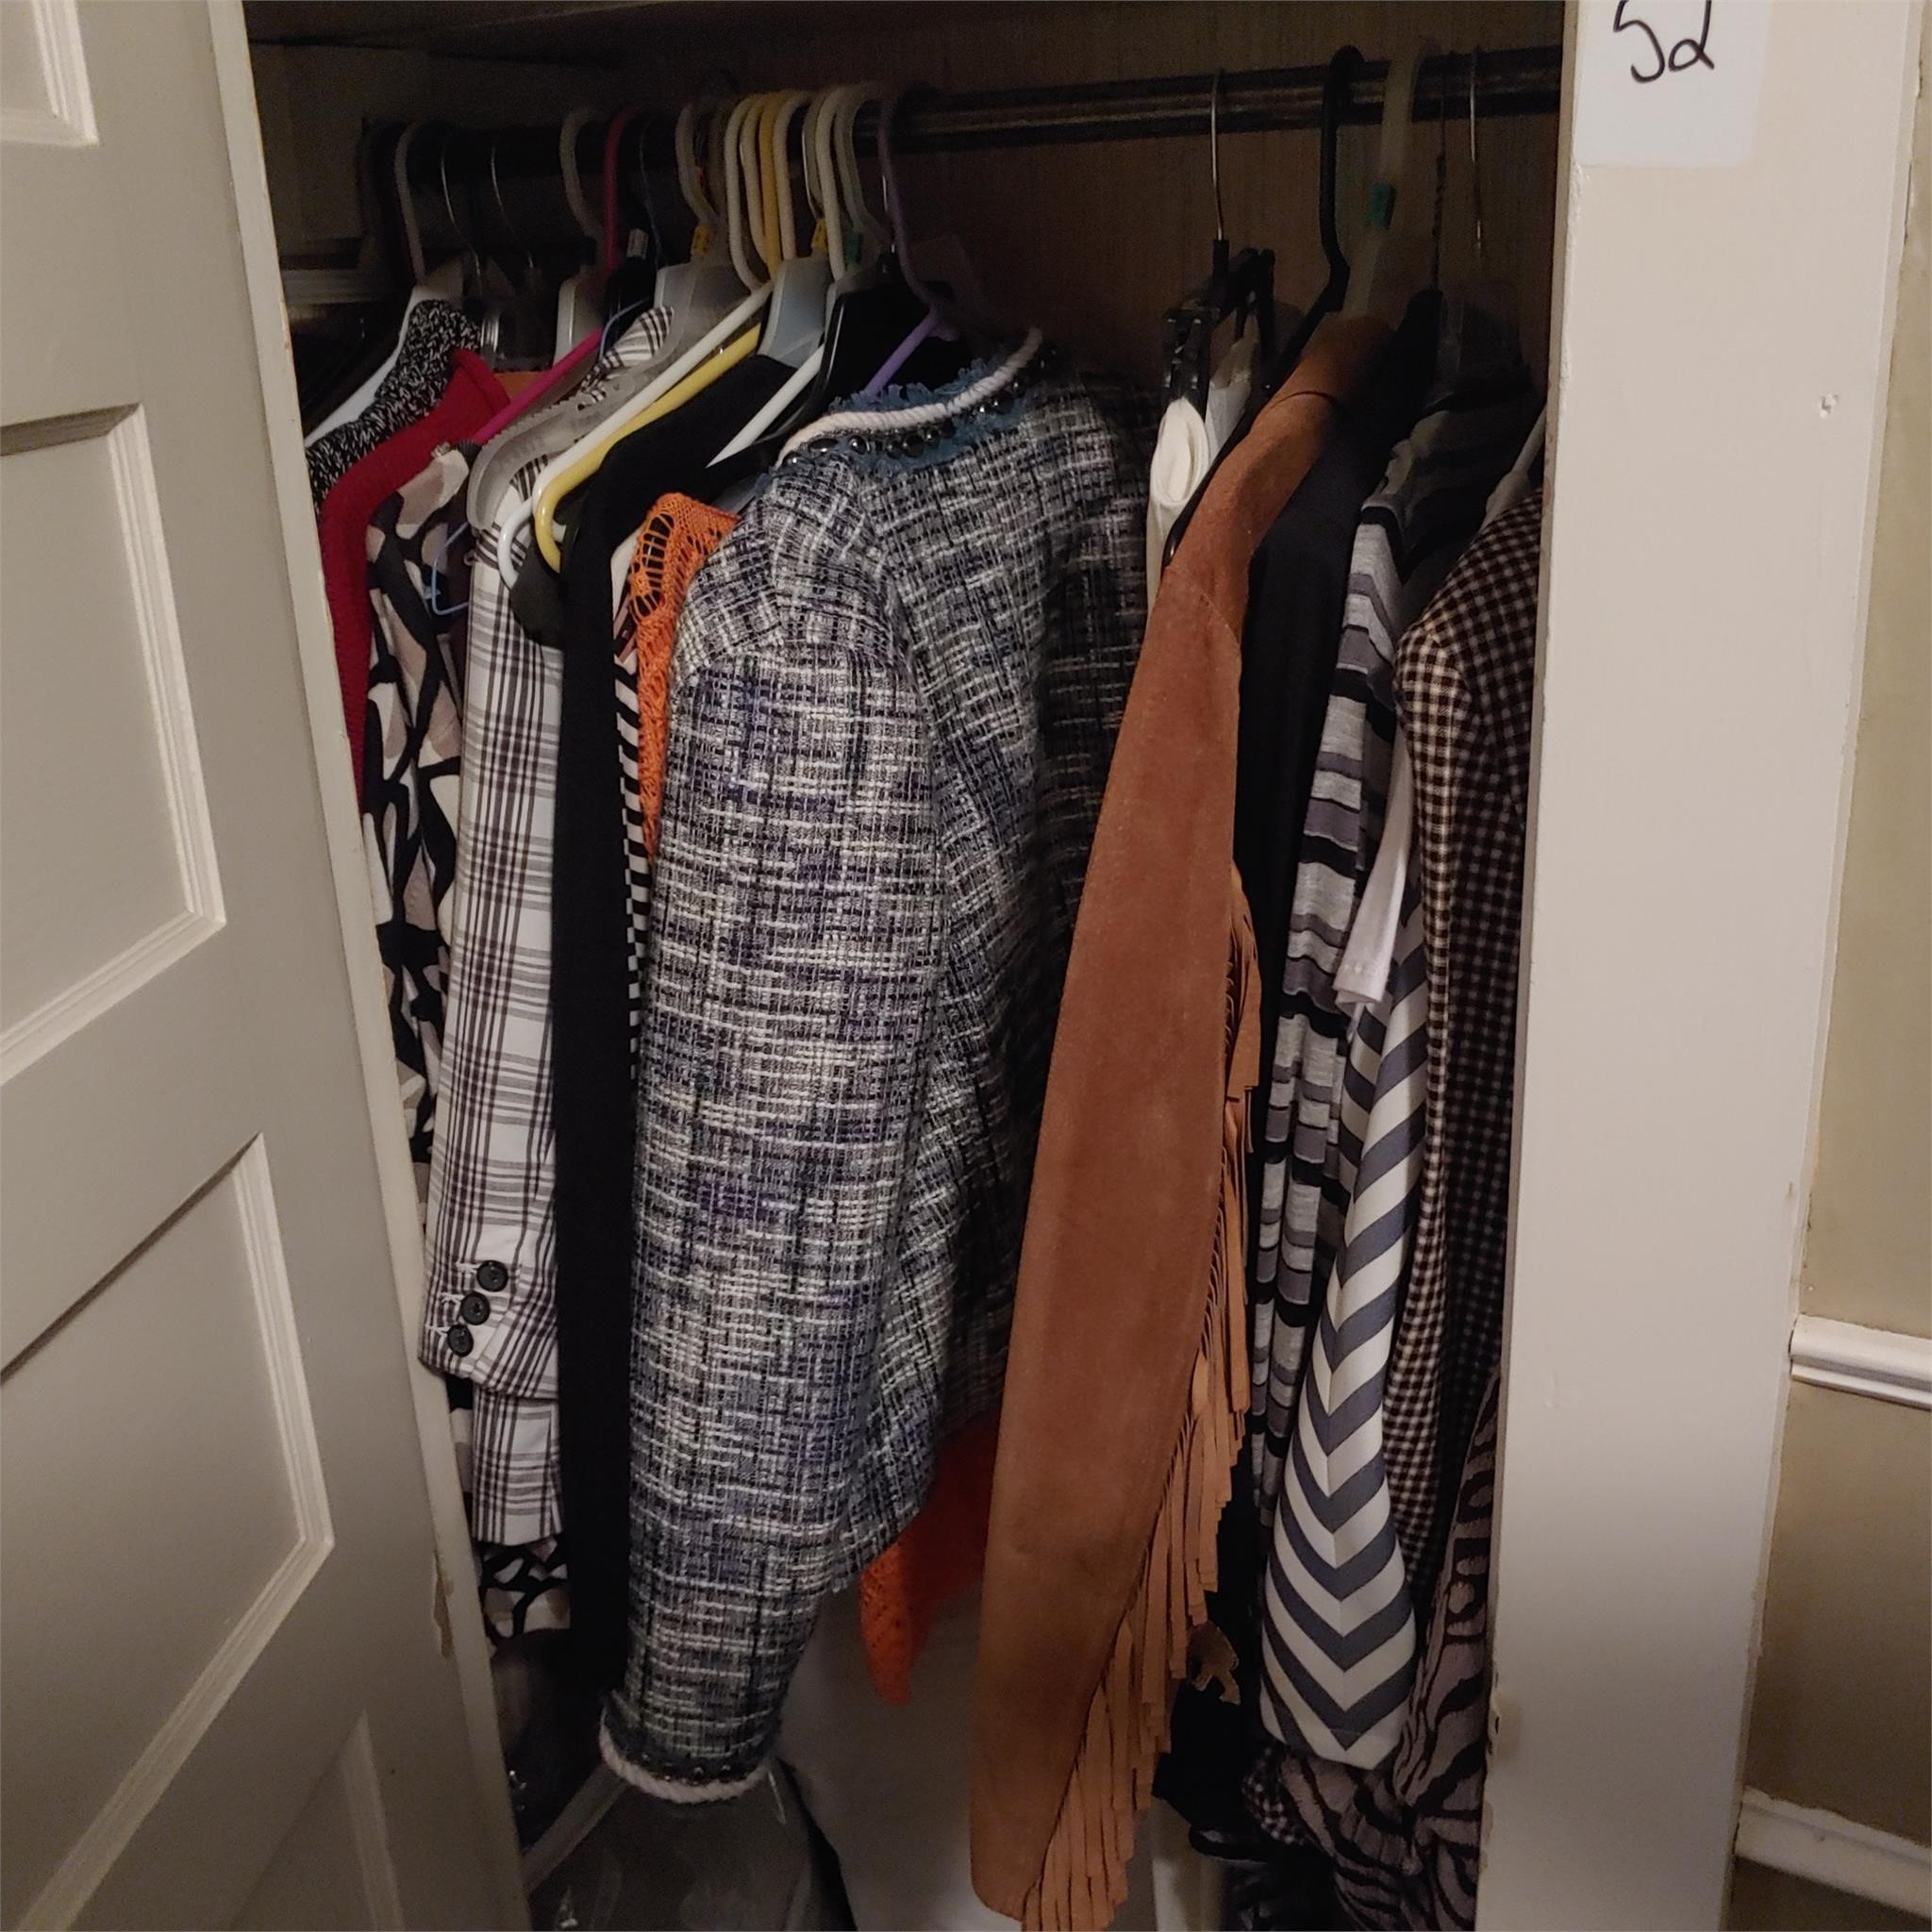 CONTENTS OF CLOSET (WOMEN'S CLOTHING)